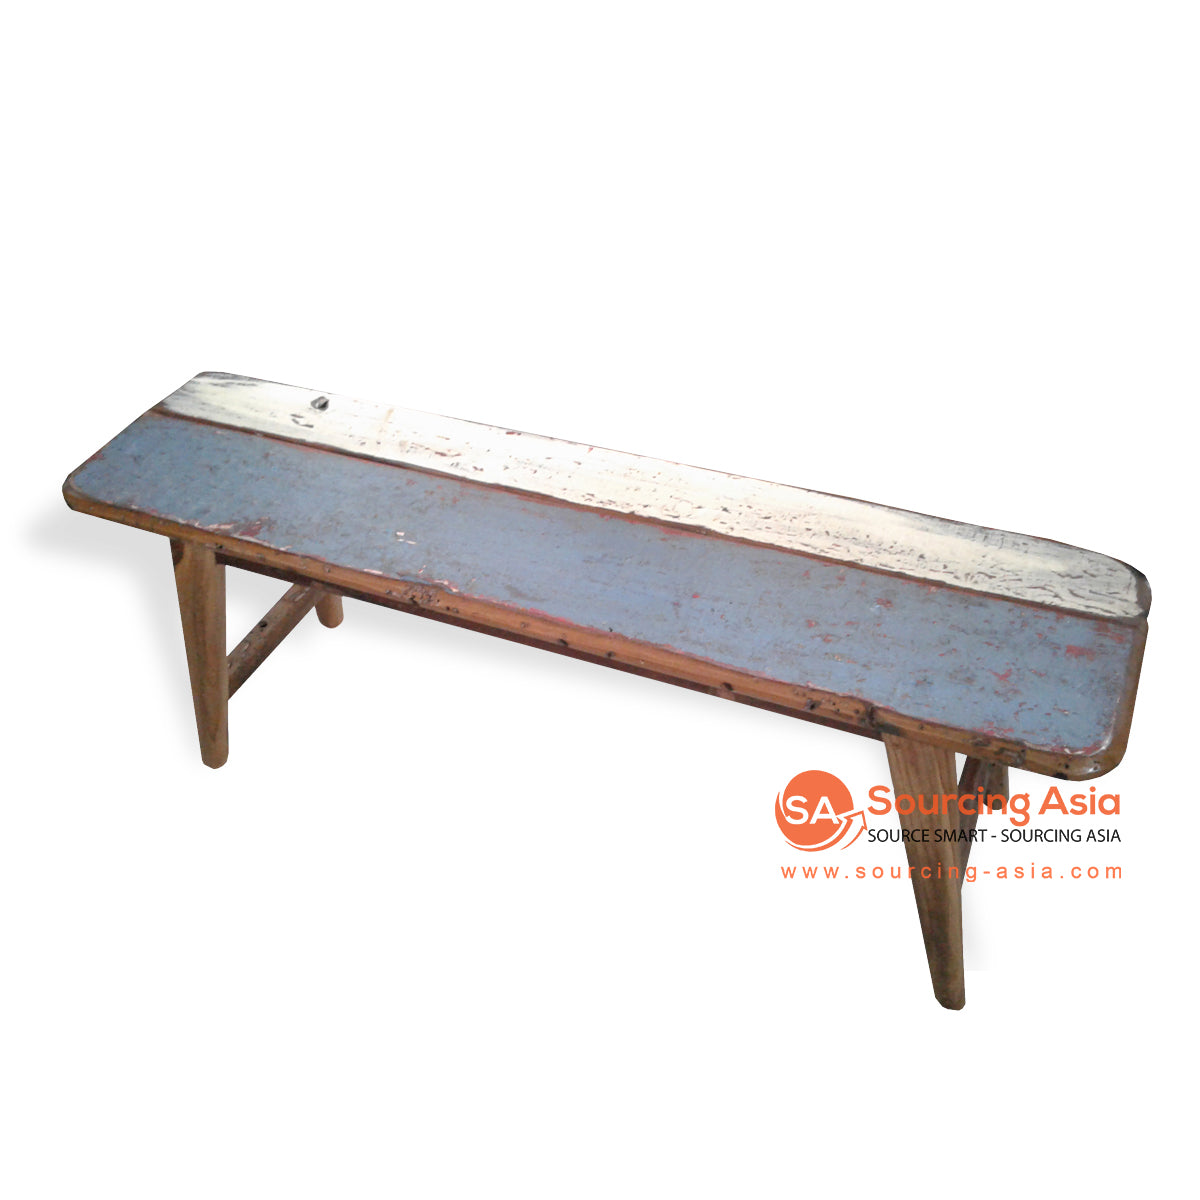 TAR184 RECYCLED BOAT WOOD RETRO BENCH